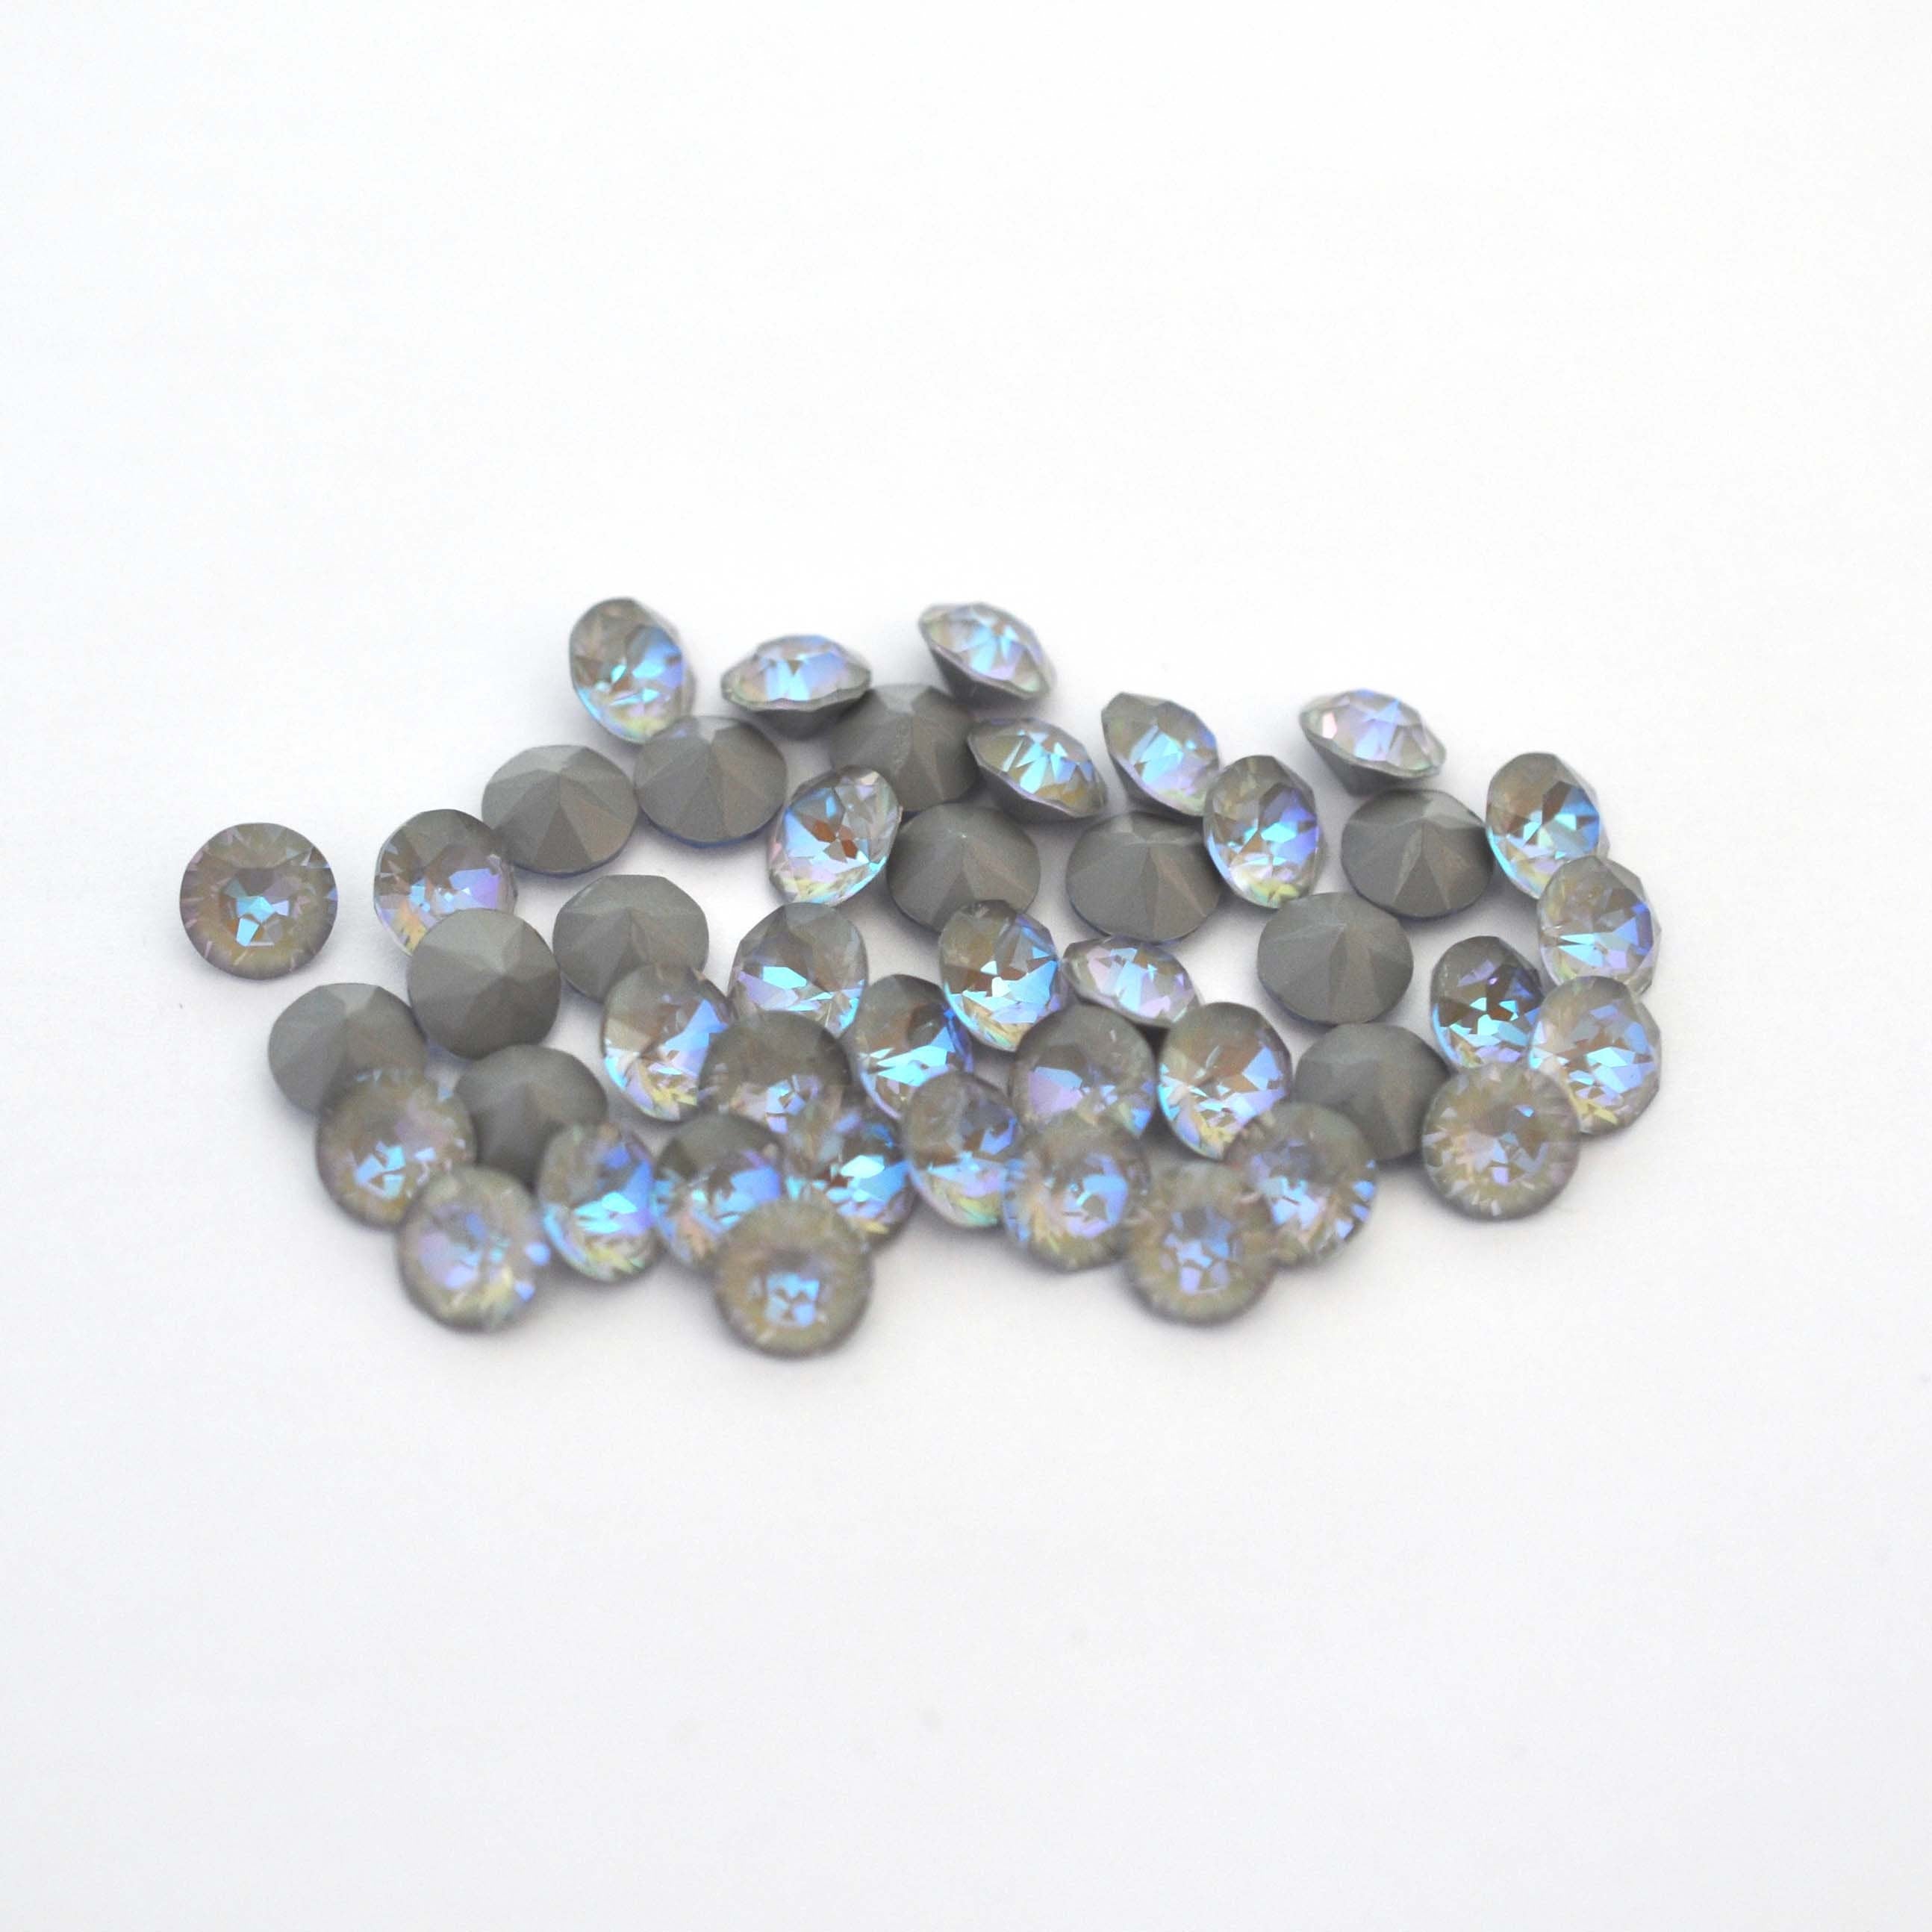 Serene Gray Delite 1088 Pointed Back Chaton Barton Crystal 29ss, 6mm